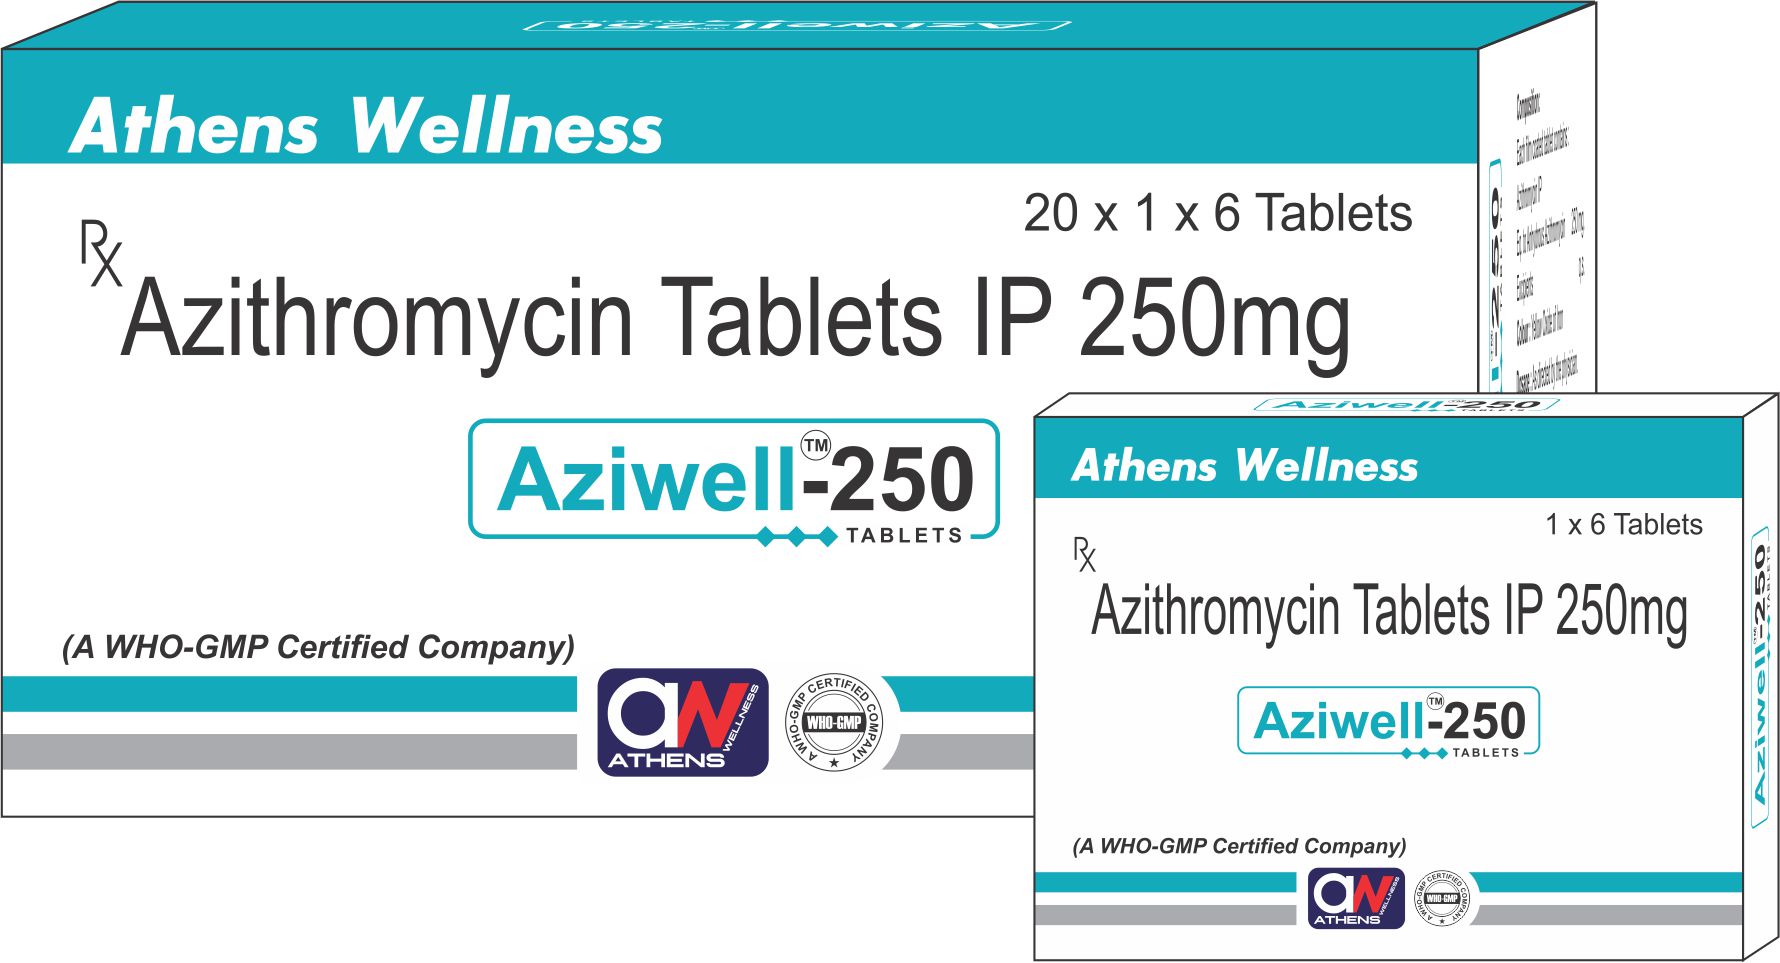 AZIWELL-250 TABLETS